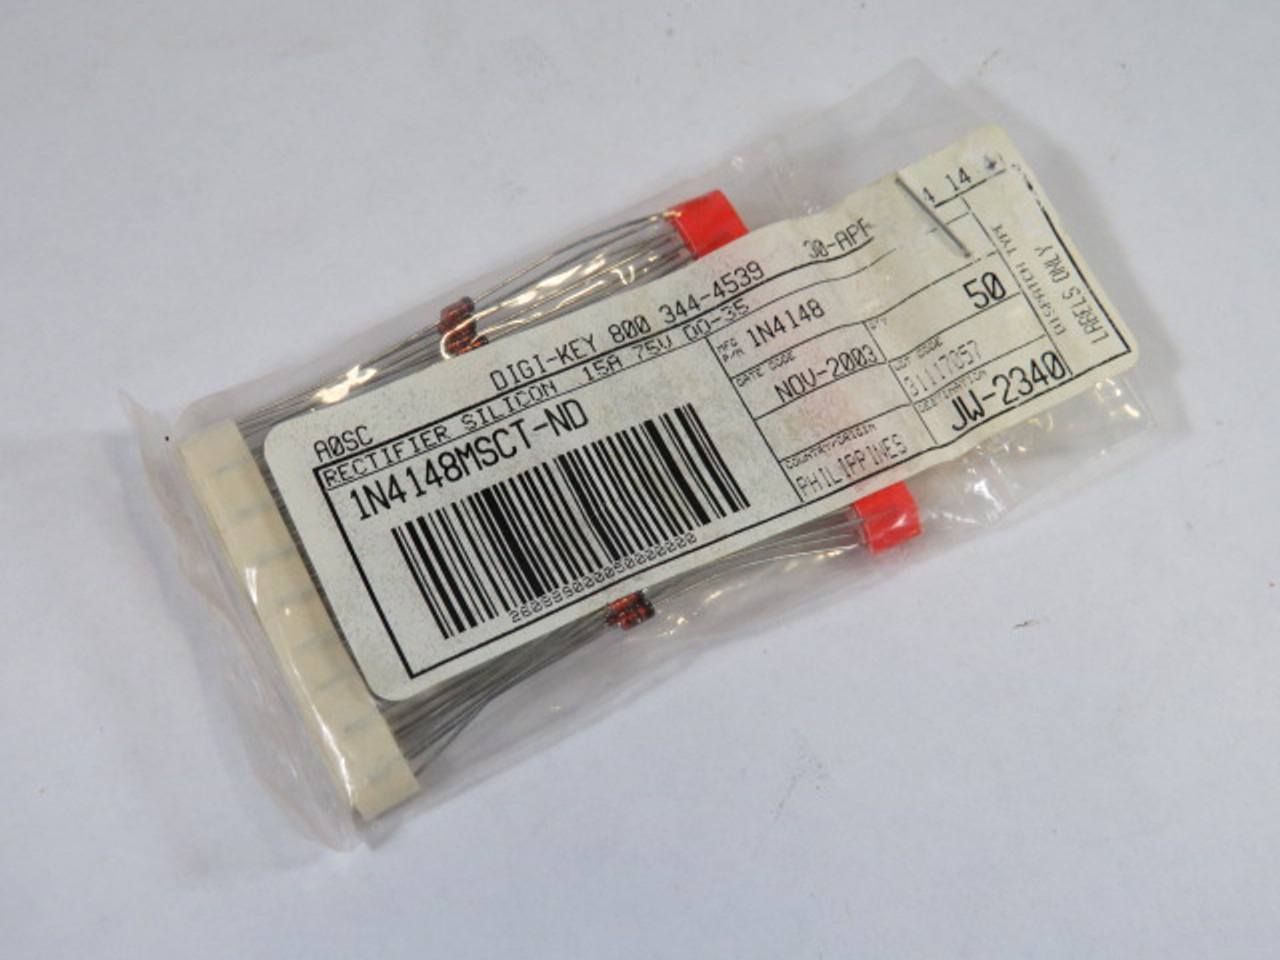 ON Semiconductor 1N4148 Diode Standard 100V 200mA DO-35 Lot of 50 ! NOP !